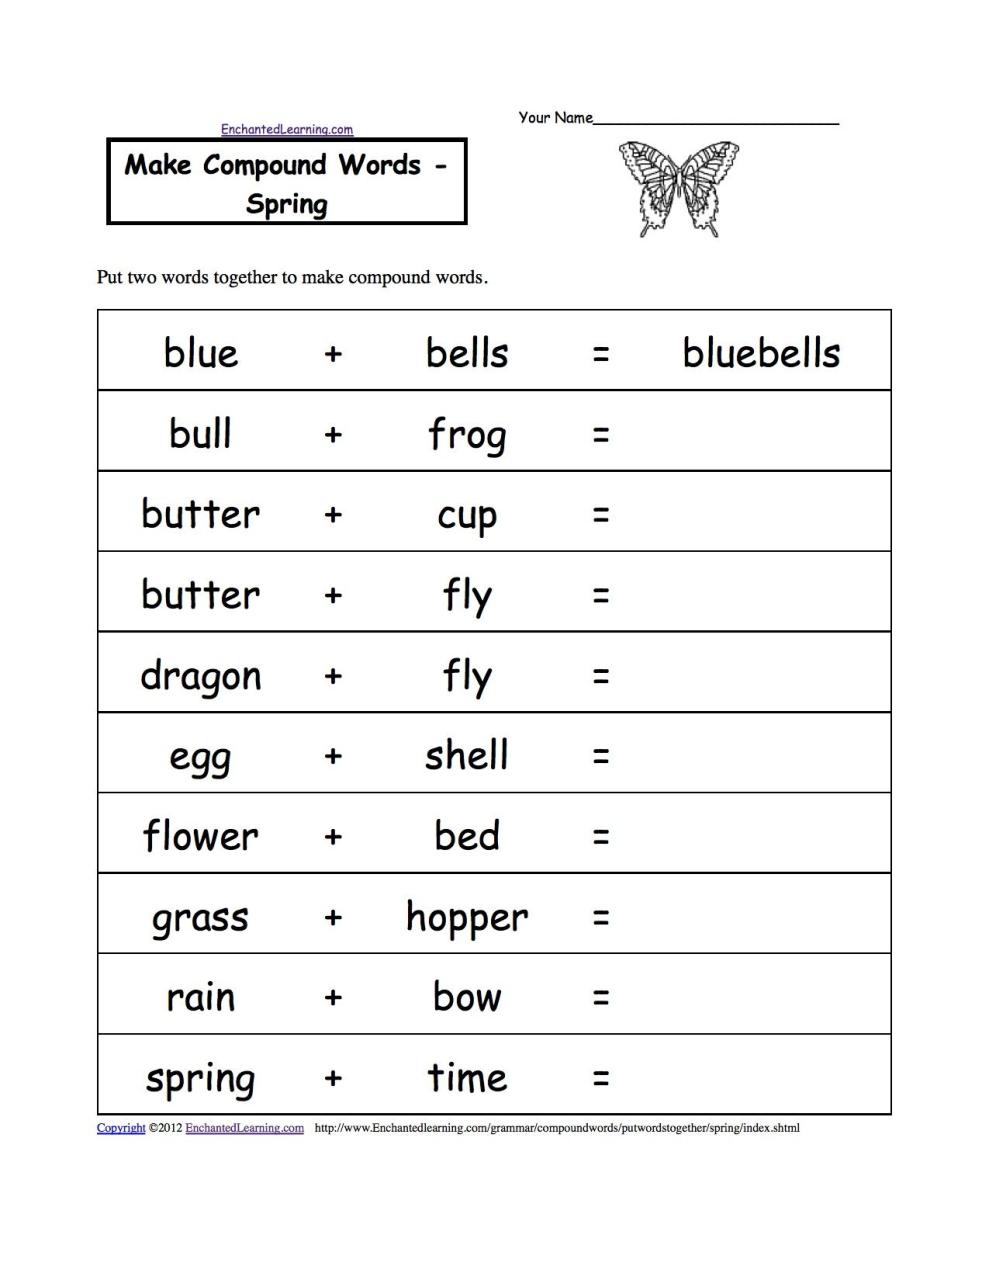 Times Tables Worksheets 3